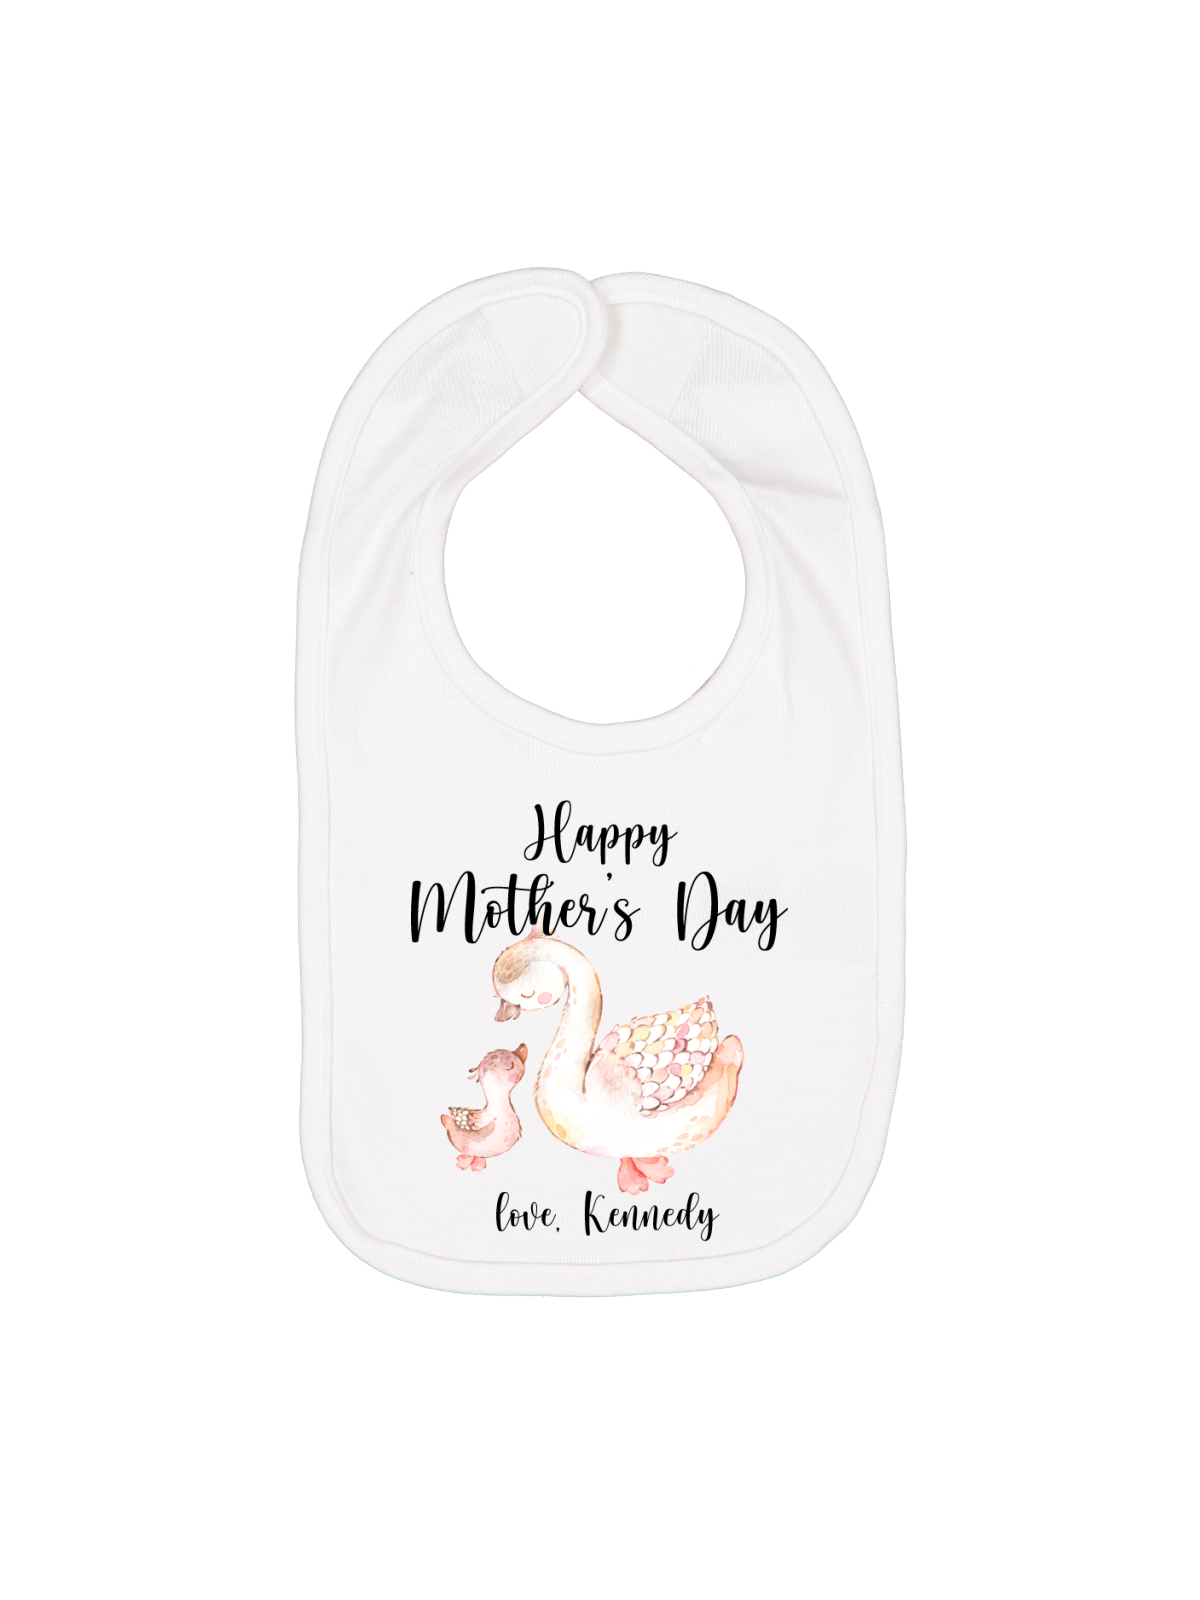 our first mother's day personalized baby swans bib